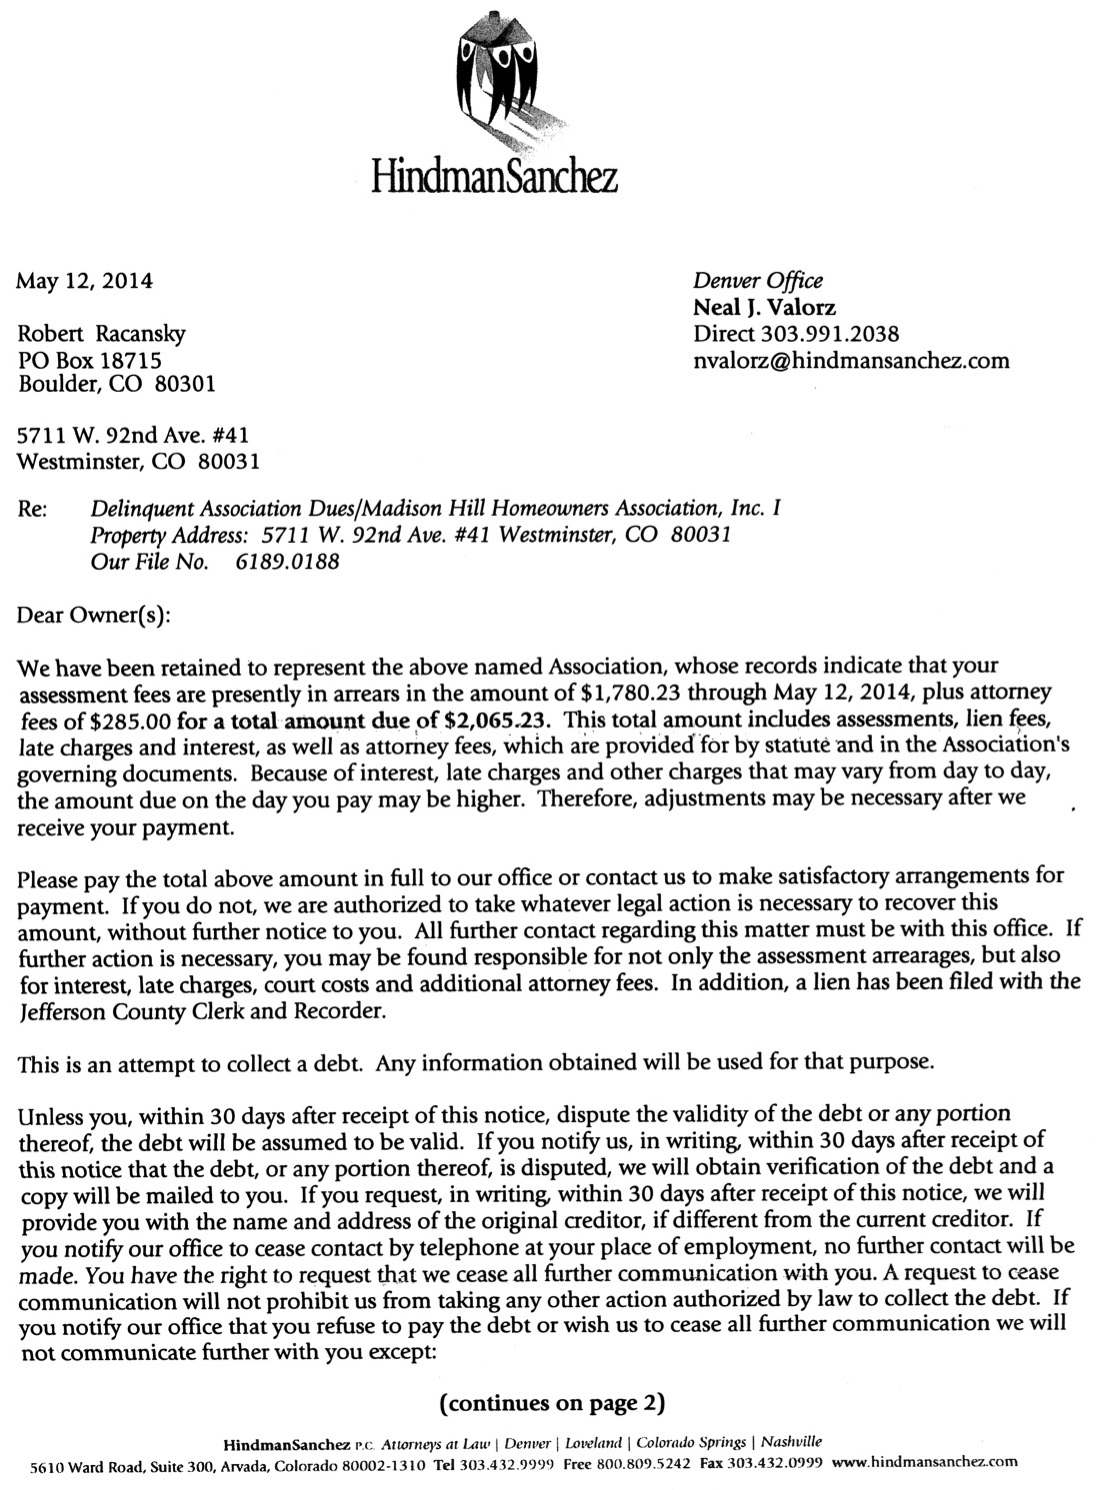 example response letter to demand letter